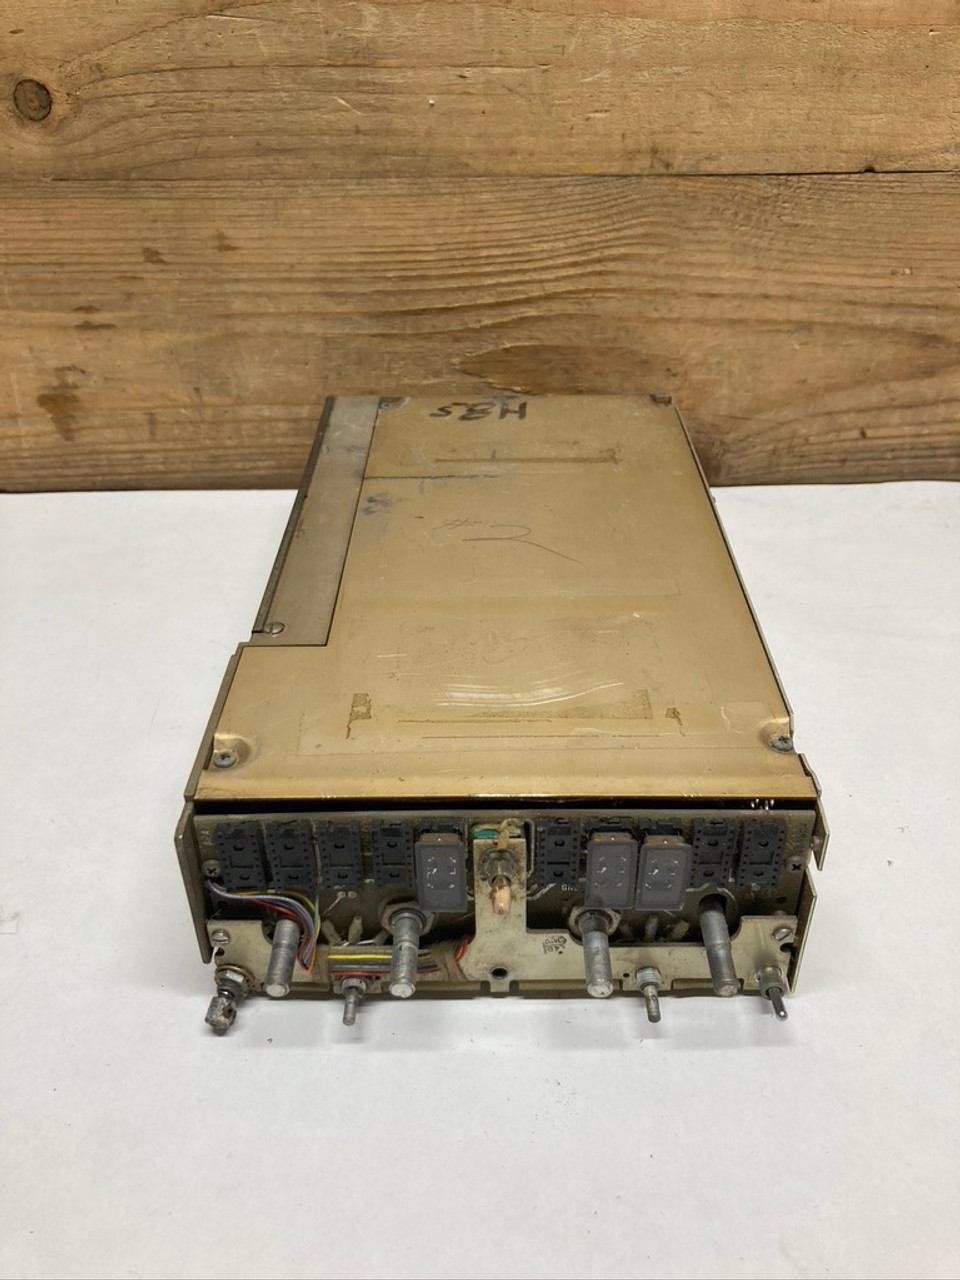 ARC Receiver-Transmitter Type No. RT-385A 46660-1100 Aircraft Radio and Control